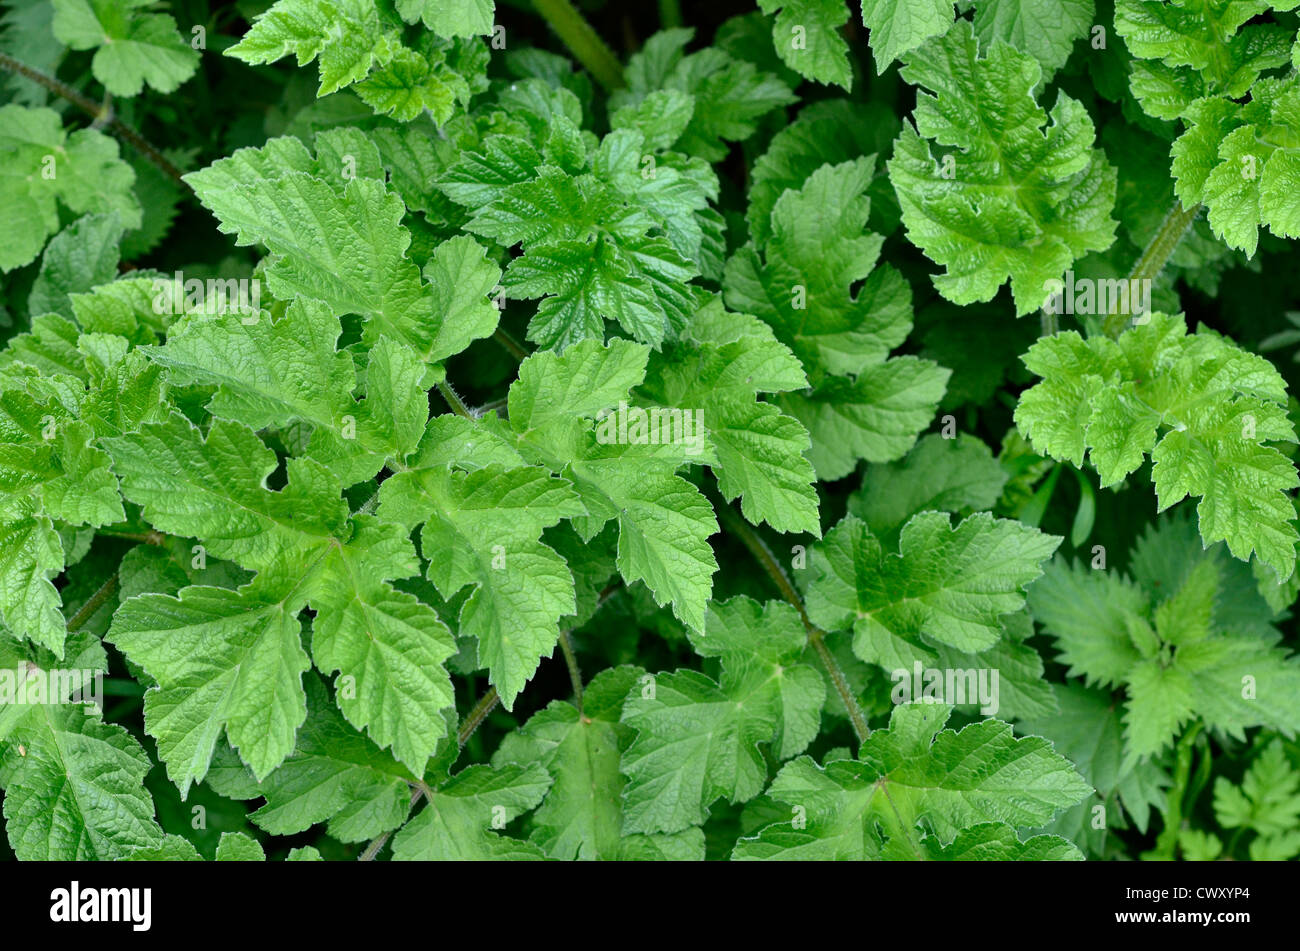 Early leaves / foliage of Hogweed / Cow Parsnip (Heracleum sphondylium) Stock Photo